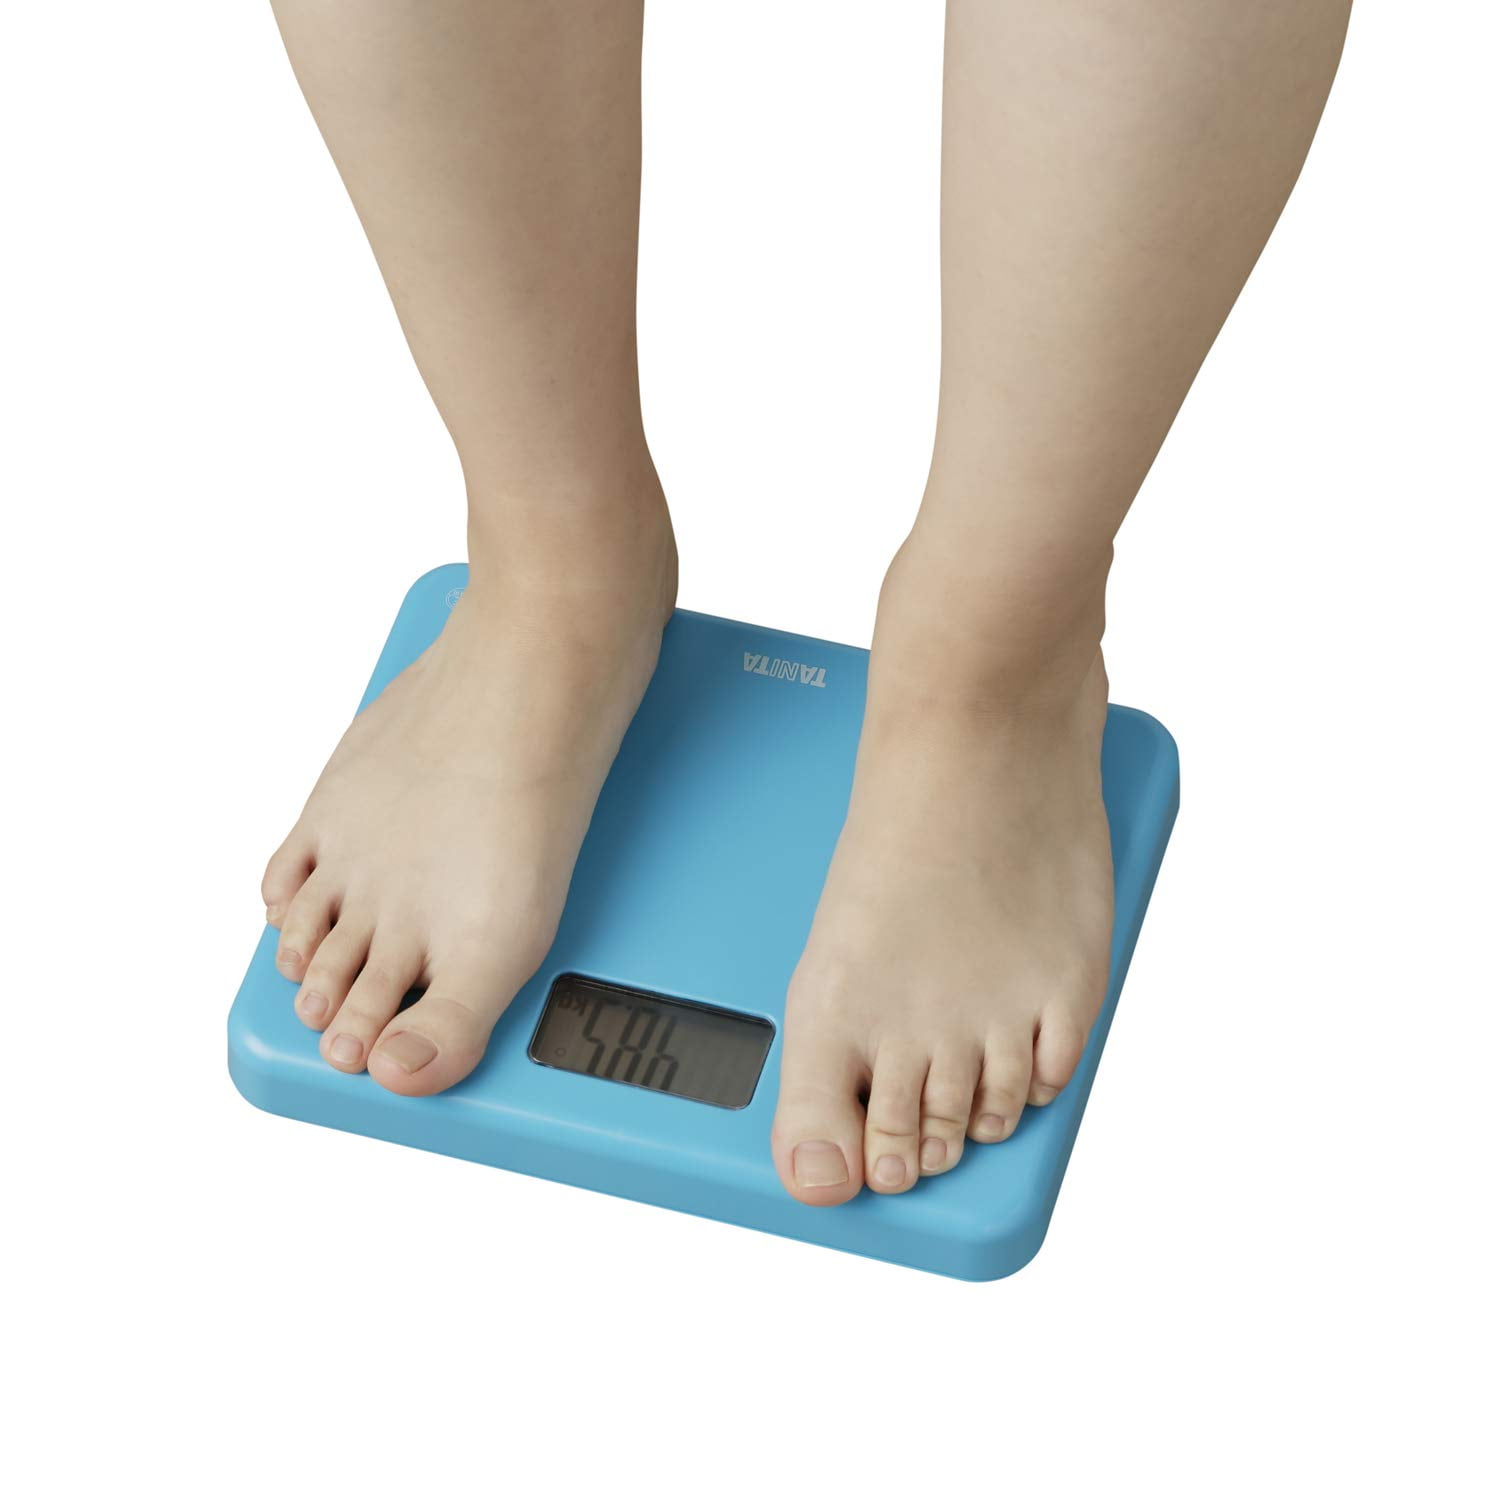 TANITA USA Personal and professional weight scales, body